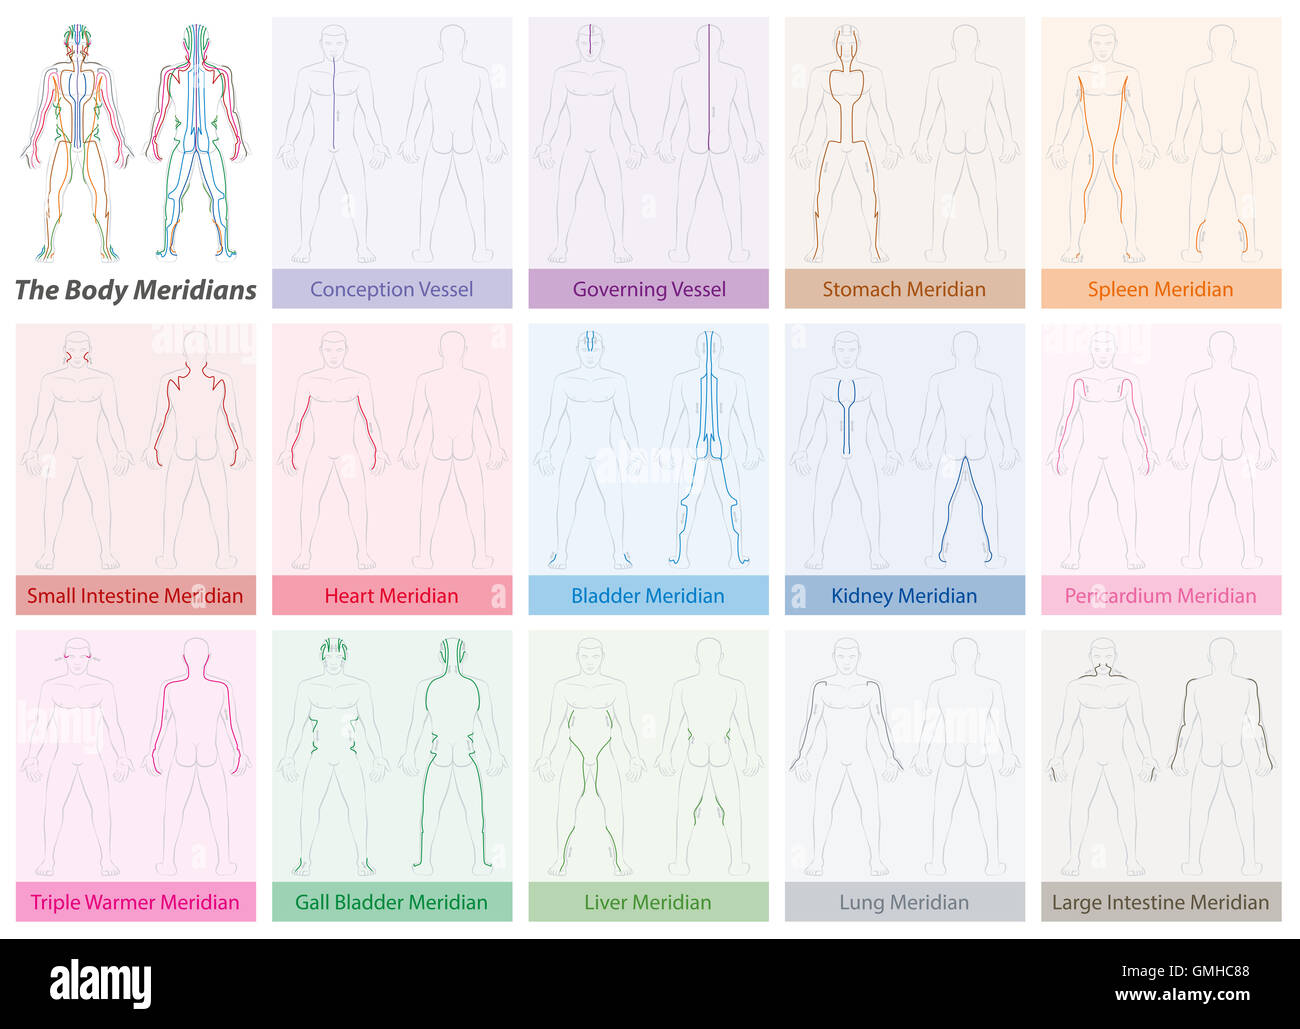 Body meridian chart with names and different colors - Traditional Chinese Medicine. Stock Photo